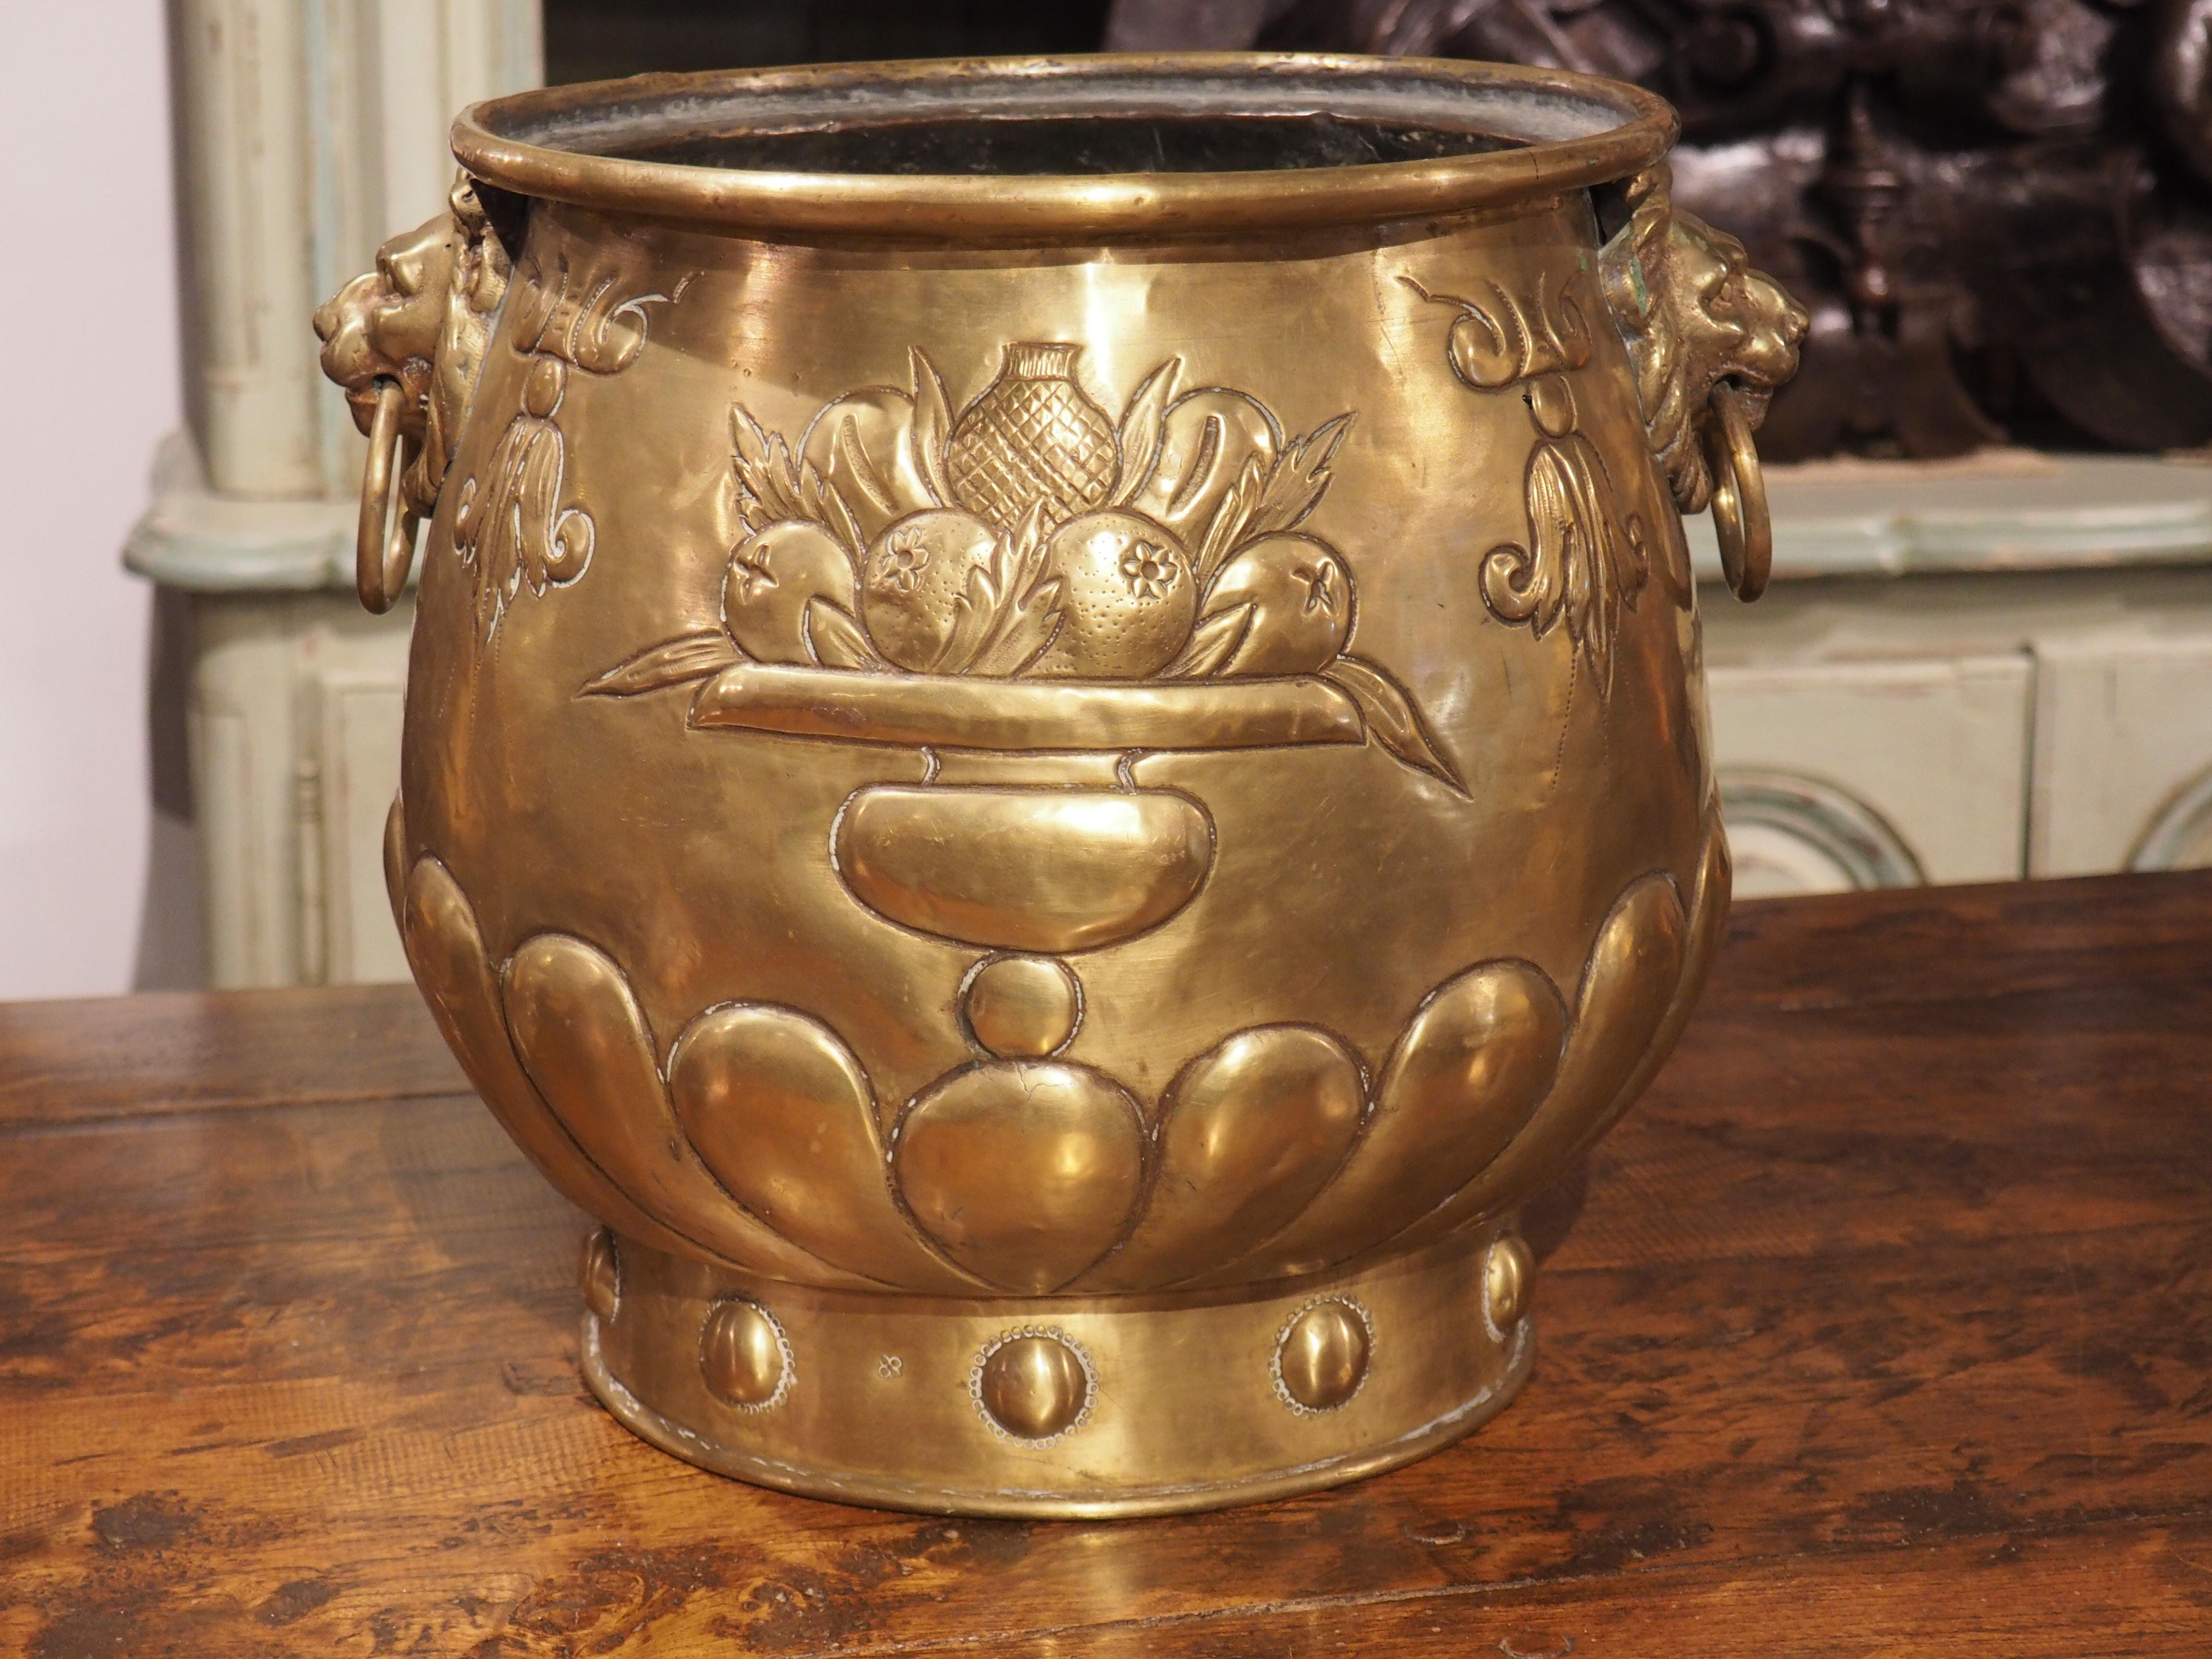 19th Century French Brass Repousse Cachepot with Coats of Arms and Lions For Sale 4